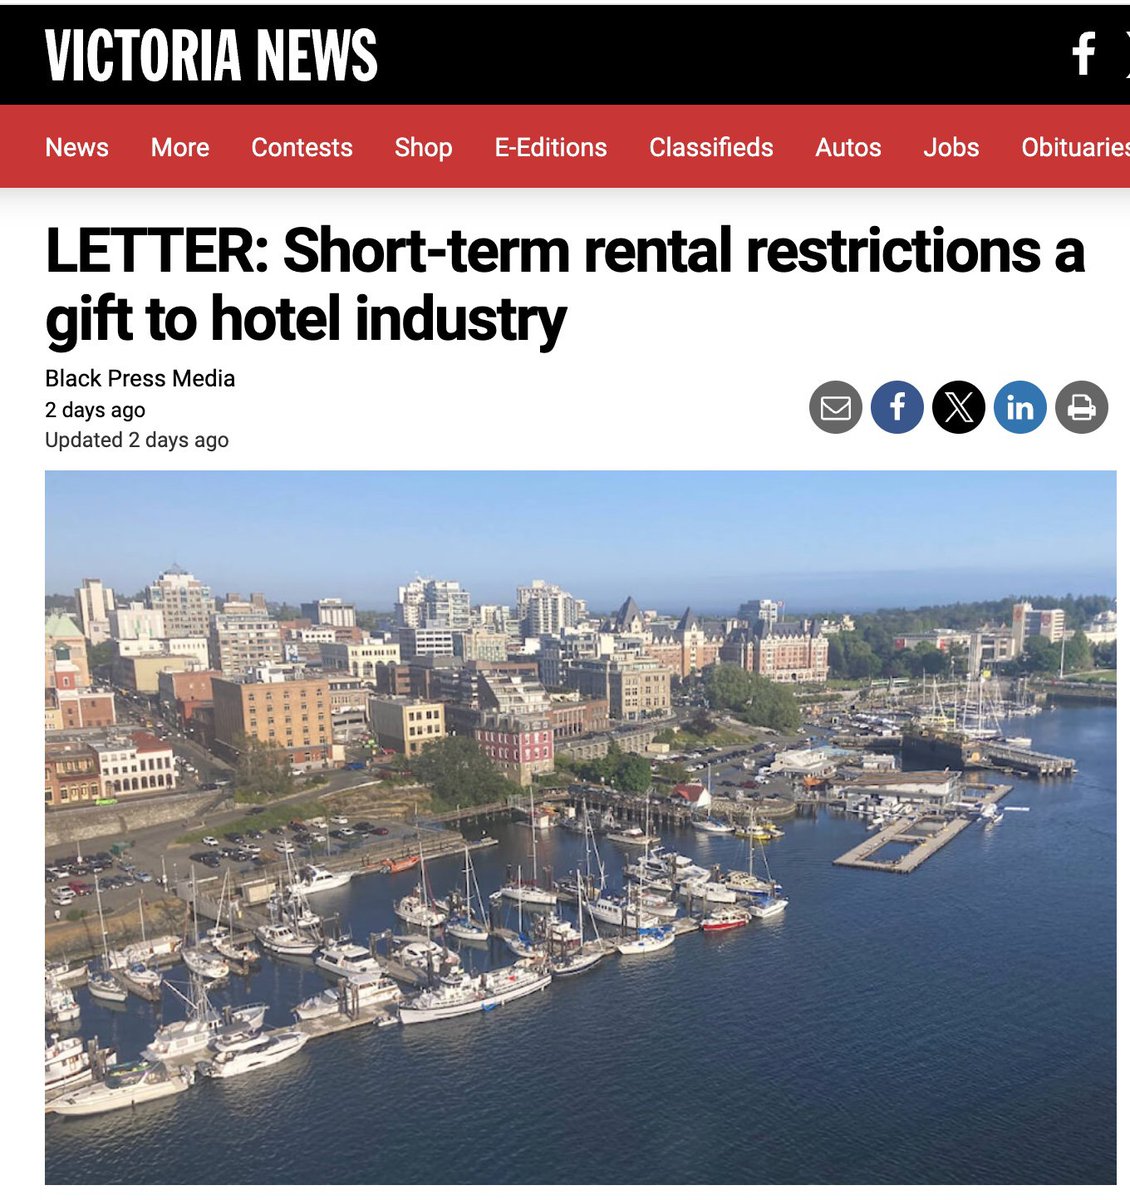 The Hotel Industry Lobby & @bcndp working scandalously together to outlaw legitimate Vacation Rentals by owners. In @Dave_Eby 's own words, he states hotels said they weren't able to make a decision to proceed unless Airbnb competition was eliminated:
bit.ly/3wcxrbU